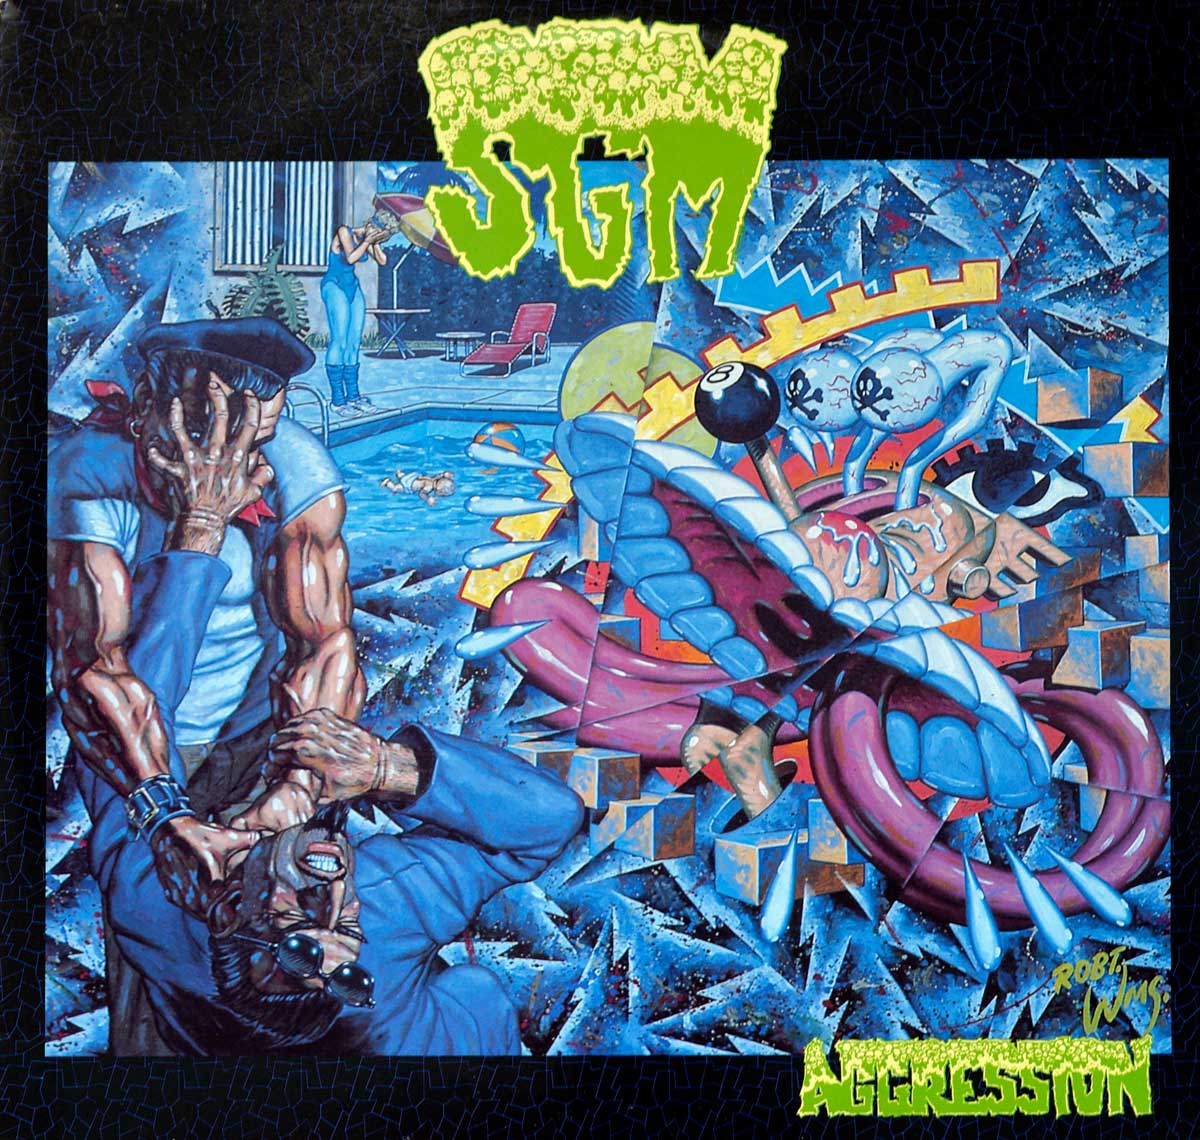 Aggression is the only official album released by Thrash Metal band "SGM" from Seatle. Album front cover illustration was by Robert Williams.